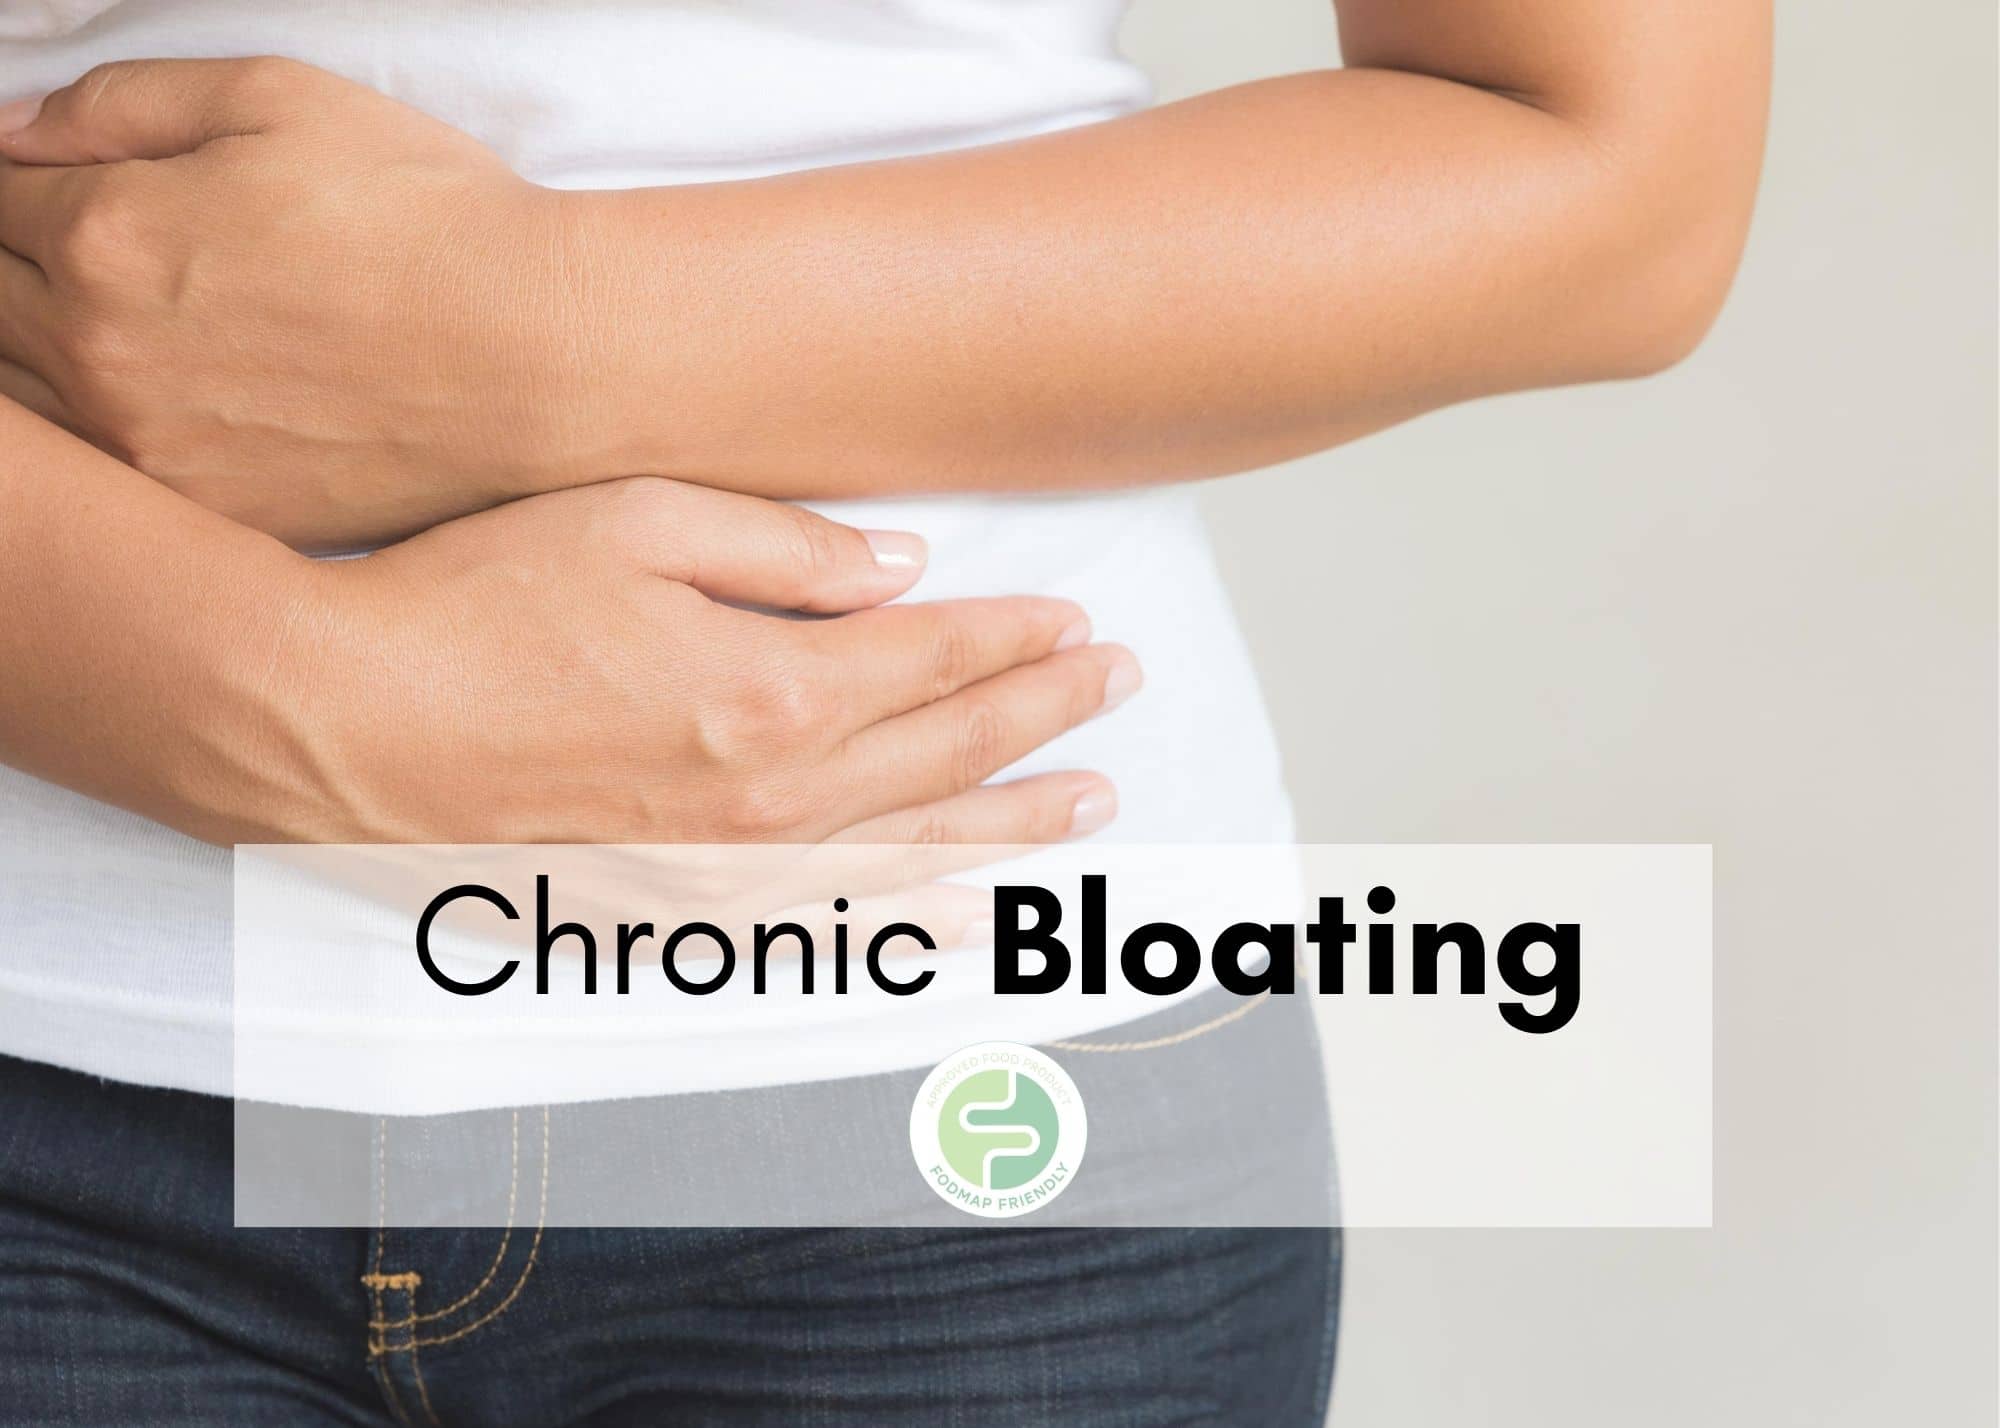 A bad case of the bloat – What is chronic bloating and what can i do about  it?